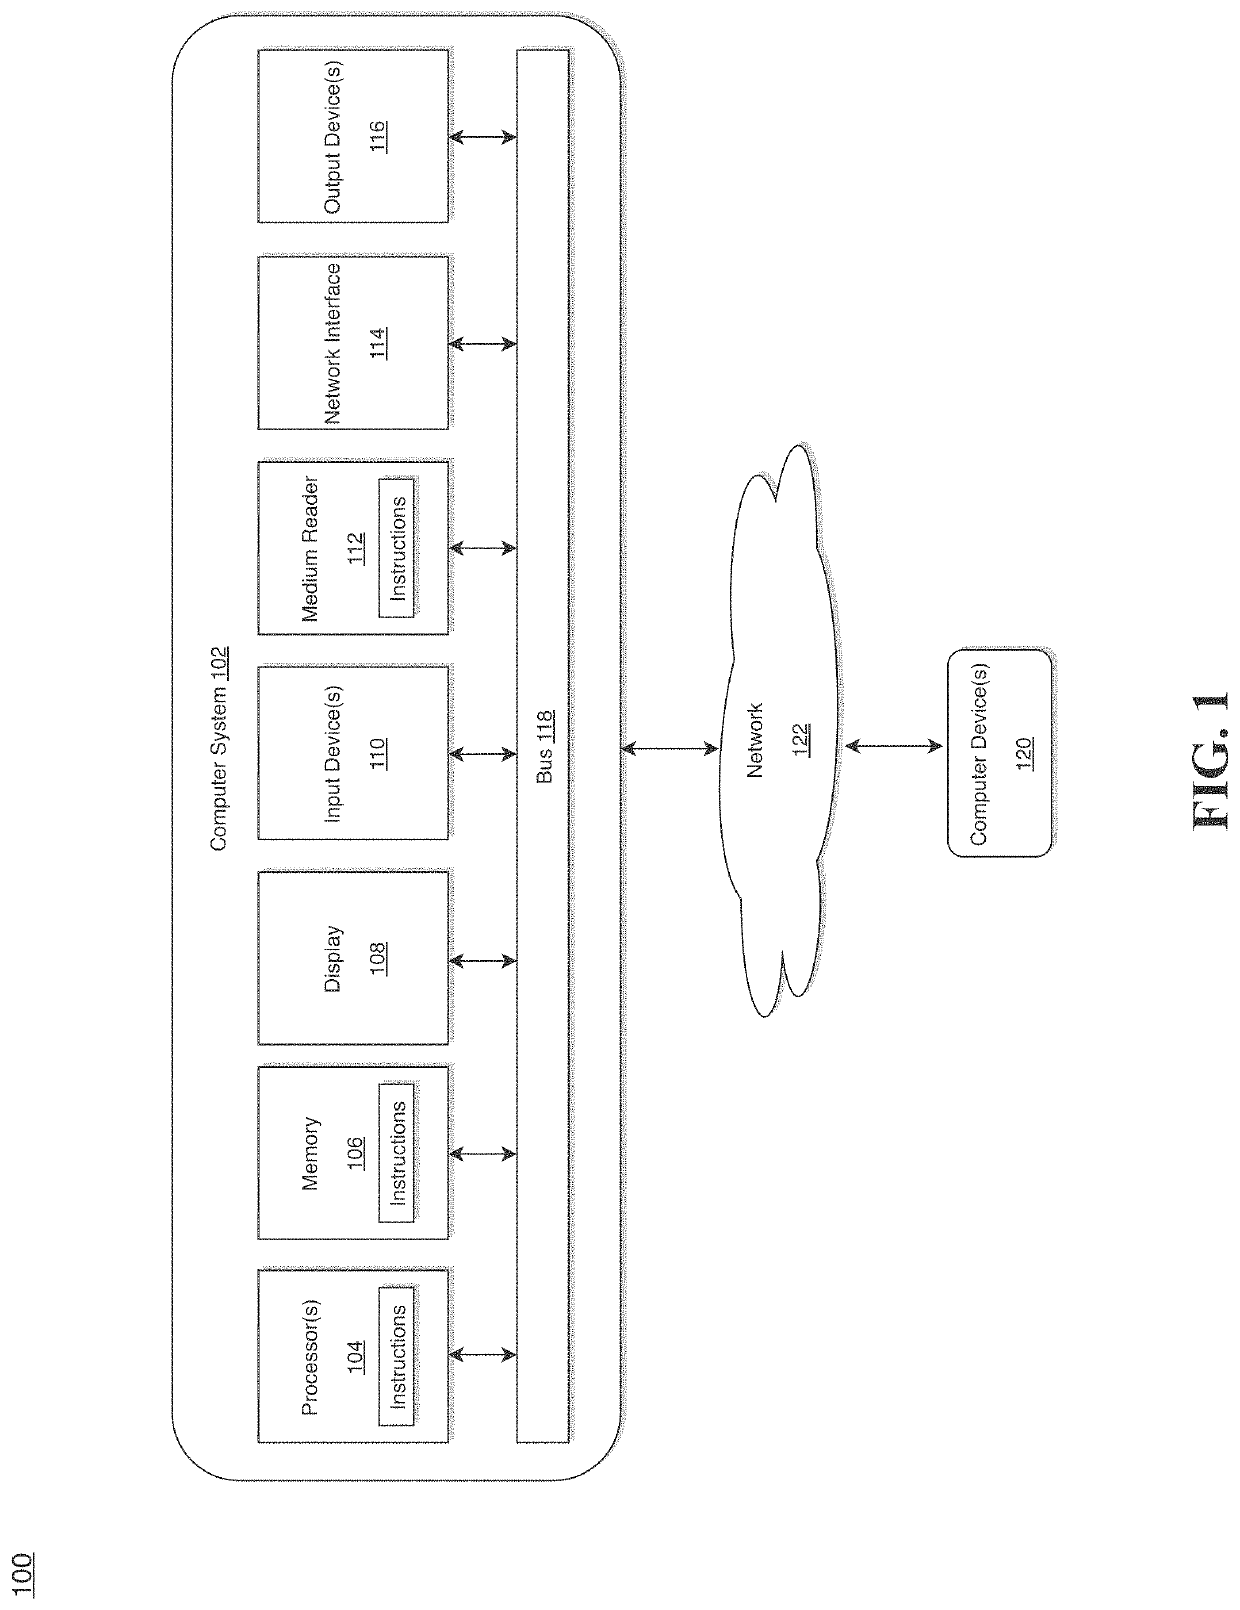 System and method for automatic orchestration and scheduling of task processing